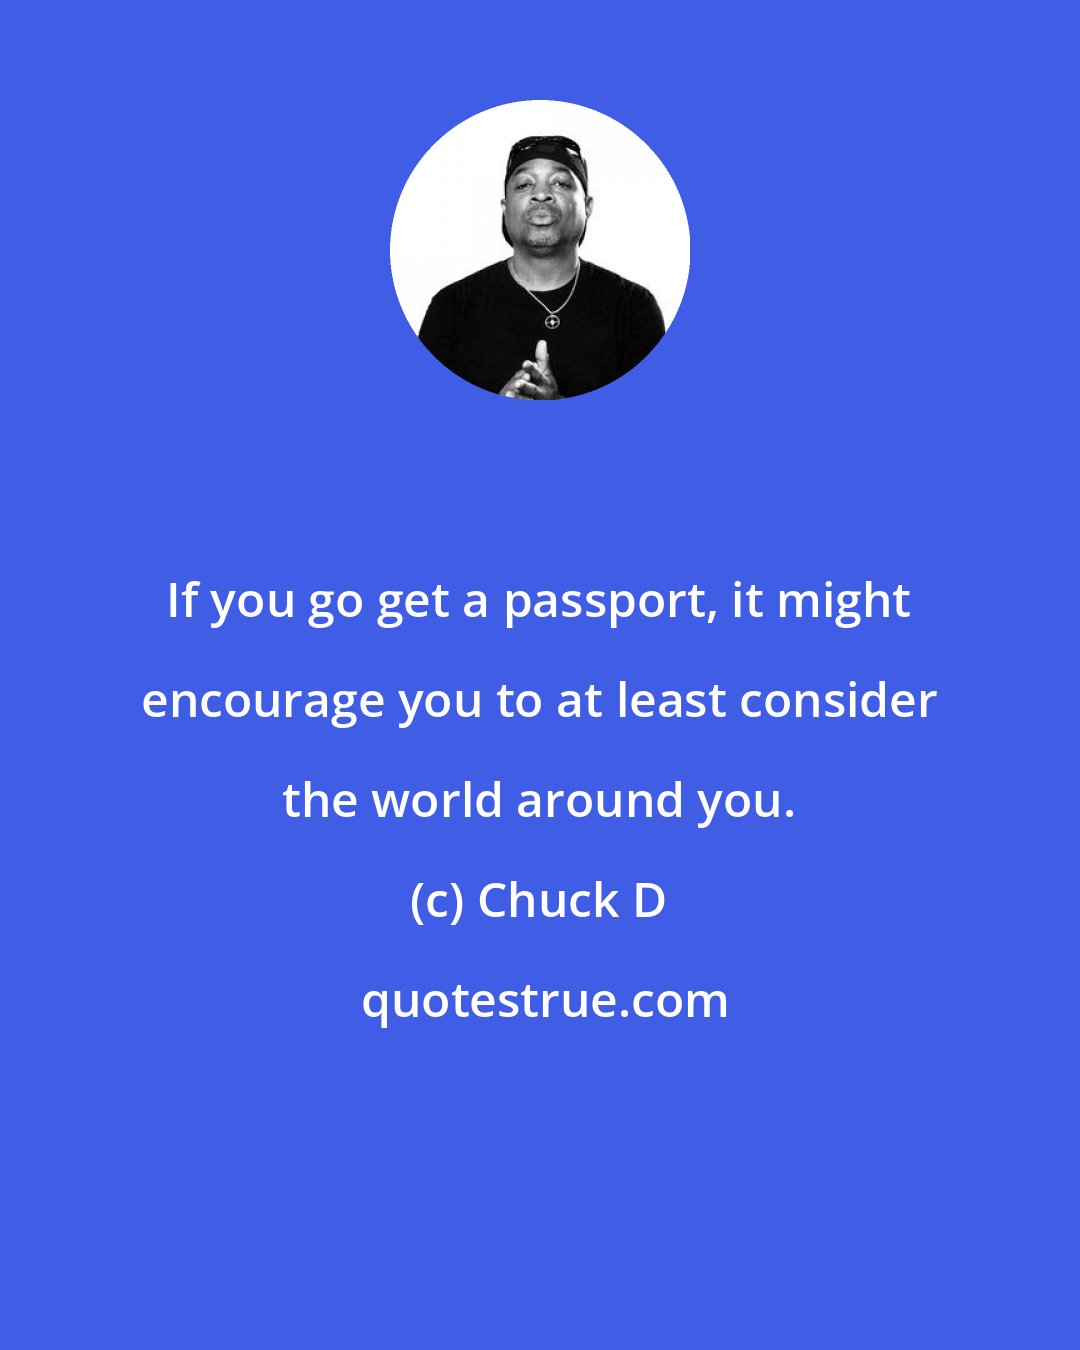 Chuck D: If you go get a passport, it might encourage you to at least consider the world around you.